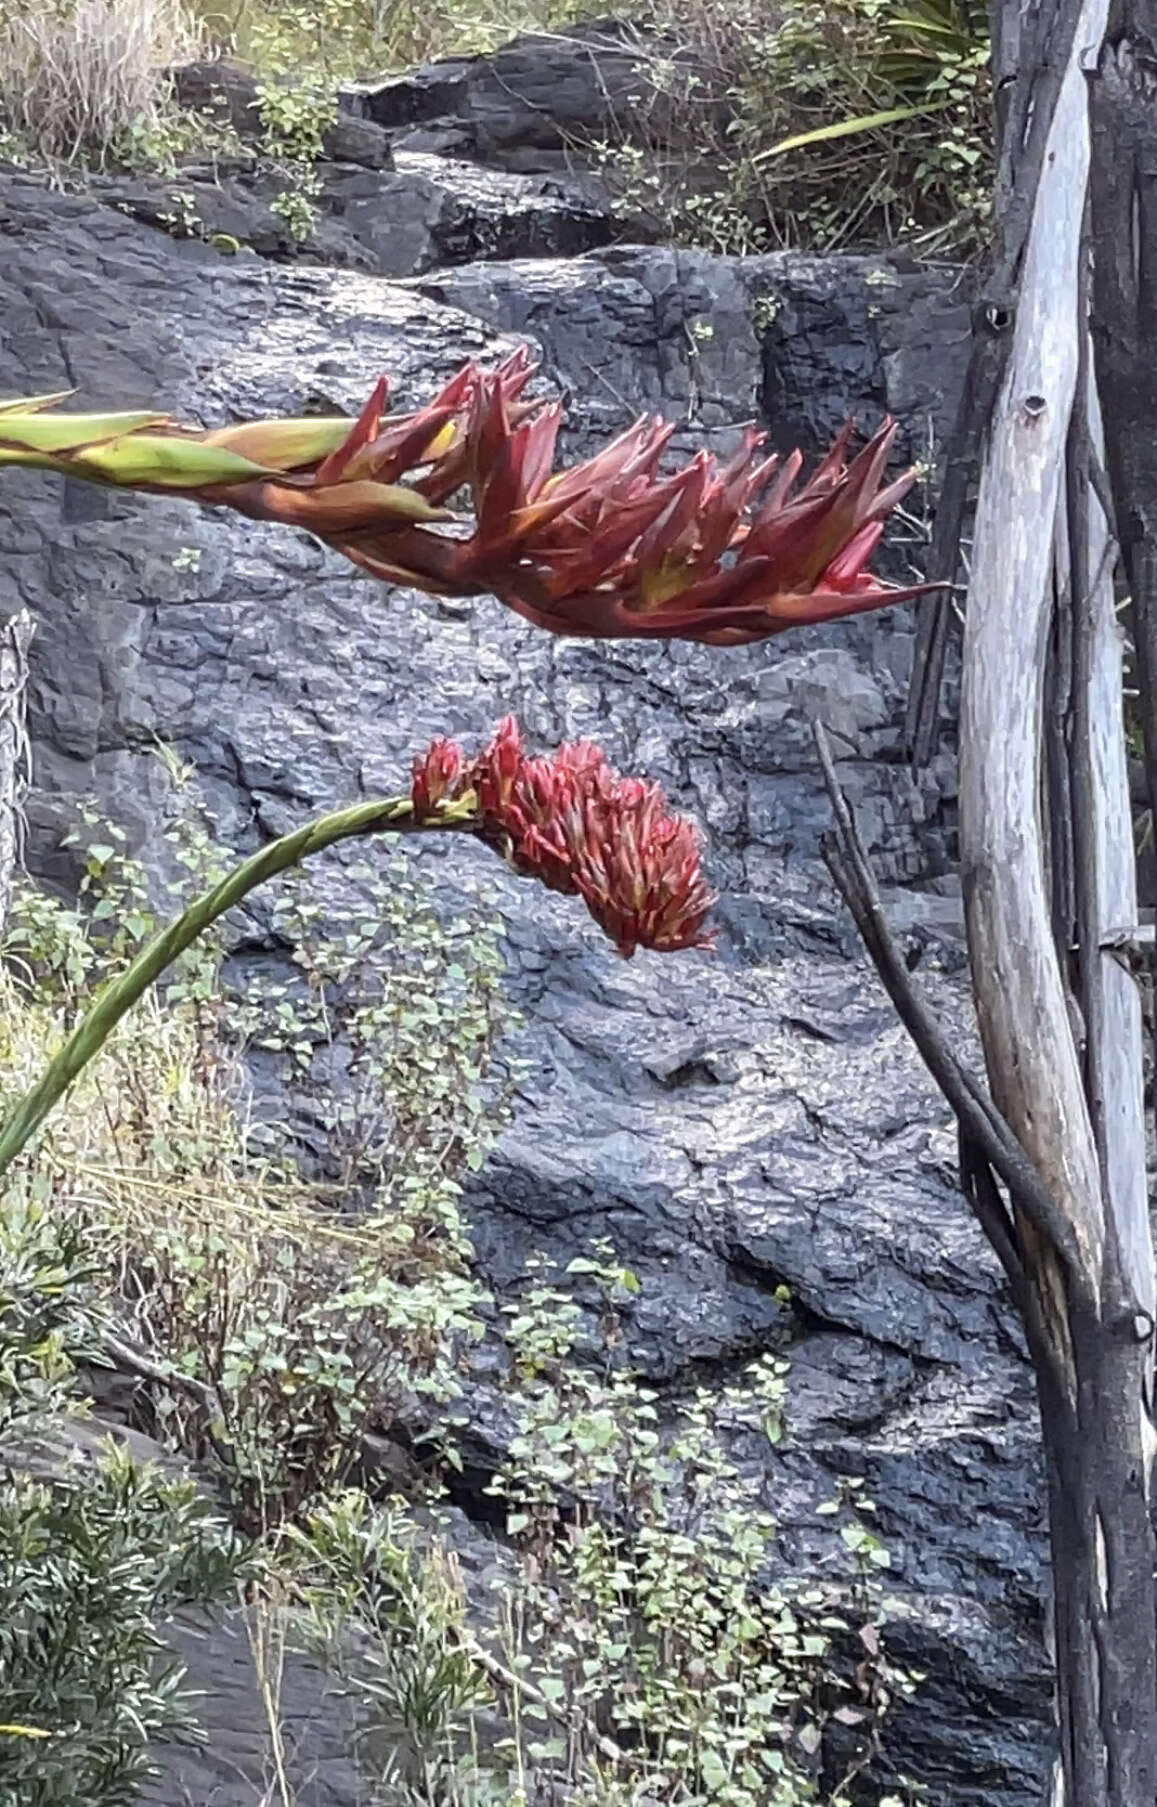 Image of giant spear lily